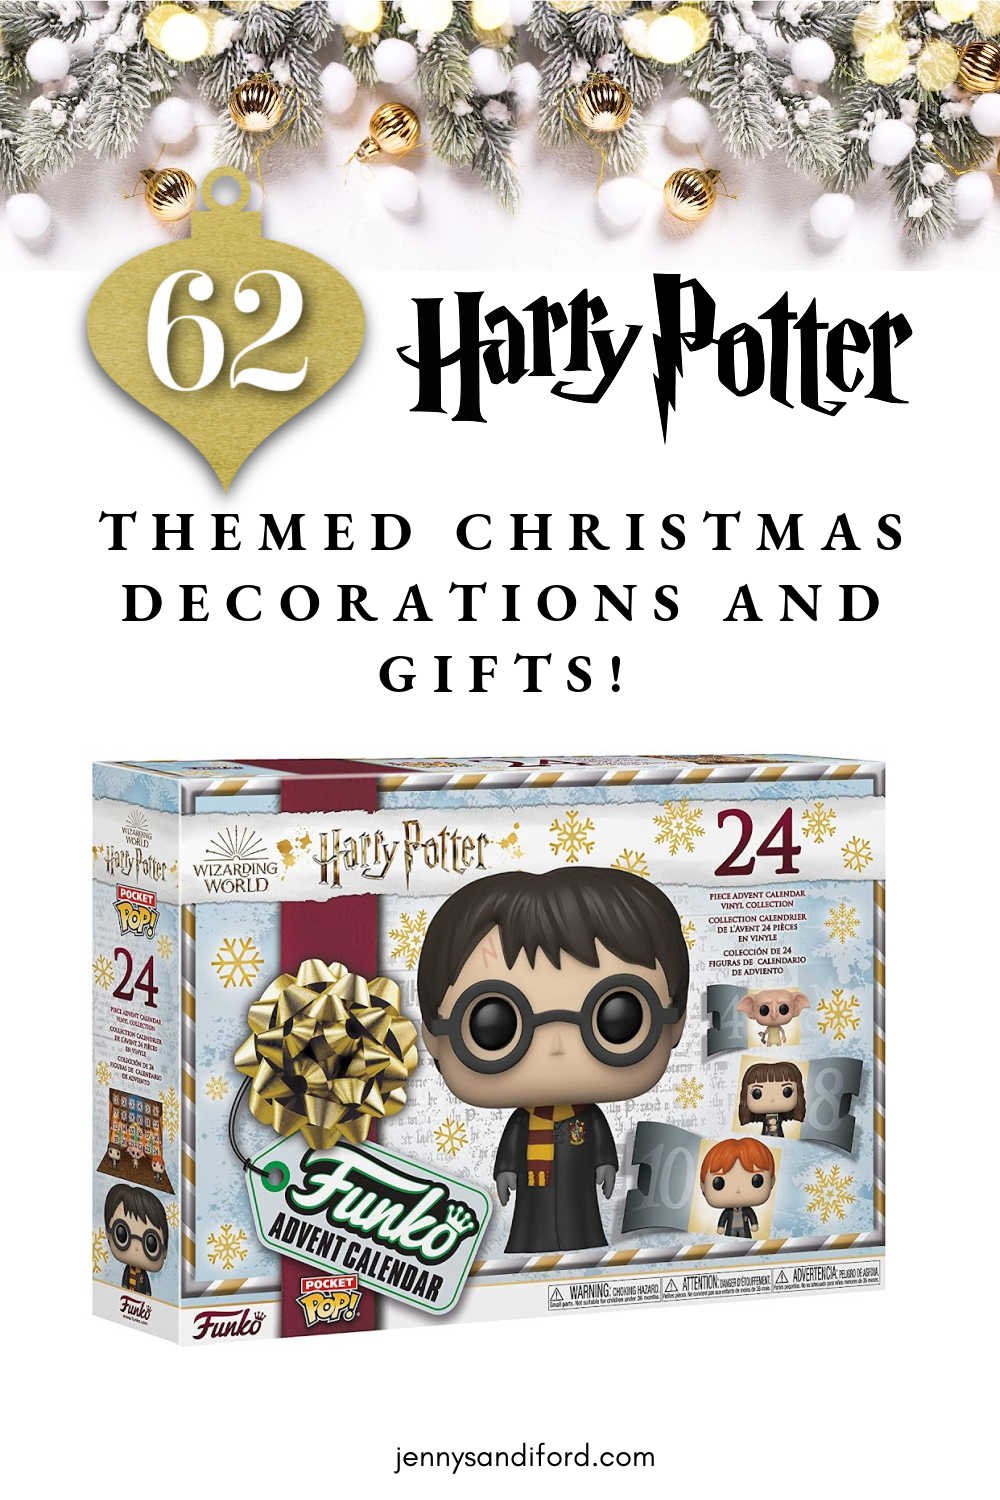 Harry Potter Stickers Party Favors Bundle ~ 10 Sheets Harry Potter Stickers Featuring Harry, Ron, Hermione and More (Harry Potter Party Supplies)